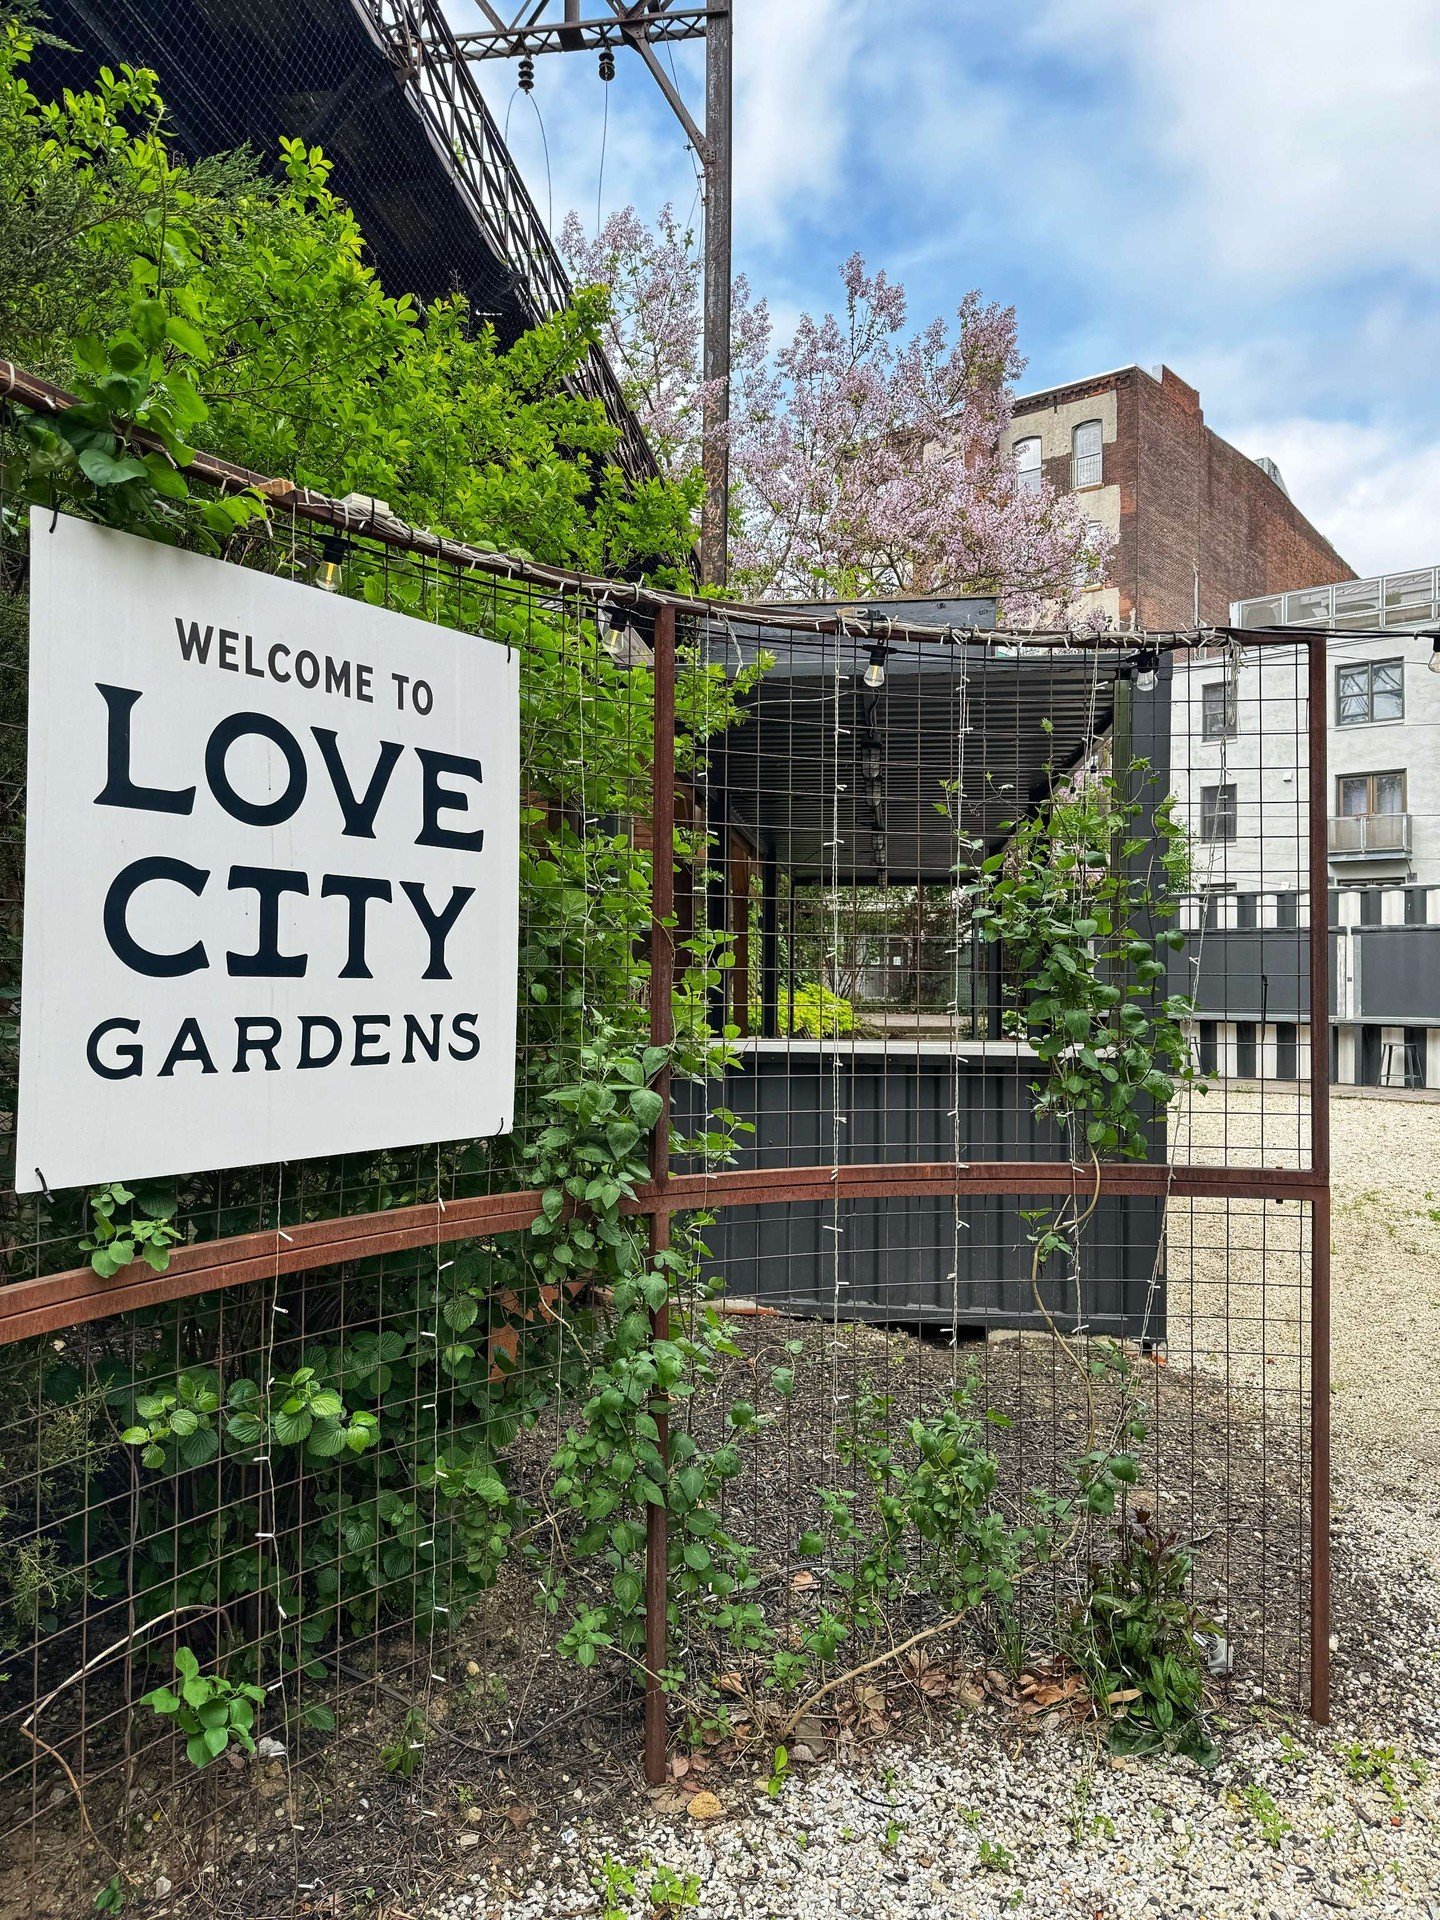 Heads up that the taproom is CLOSED❌ tonight, but Love City Gardens will be OPEN✅ at 7pm (weather permitting)☀️🌷Check our stories or give us a call for the most up-to-date info!